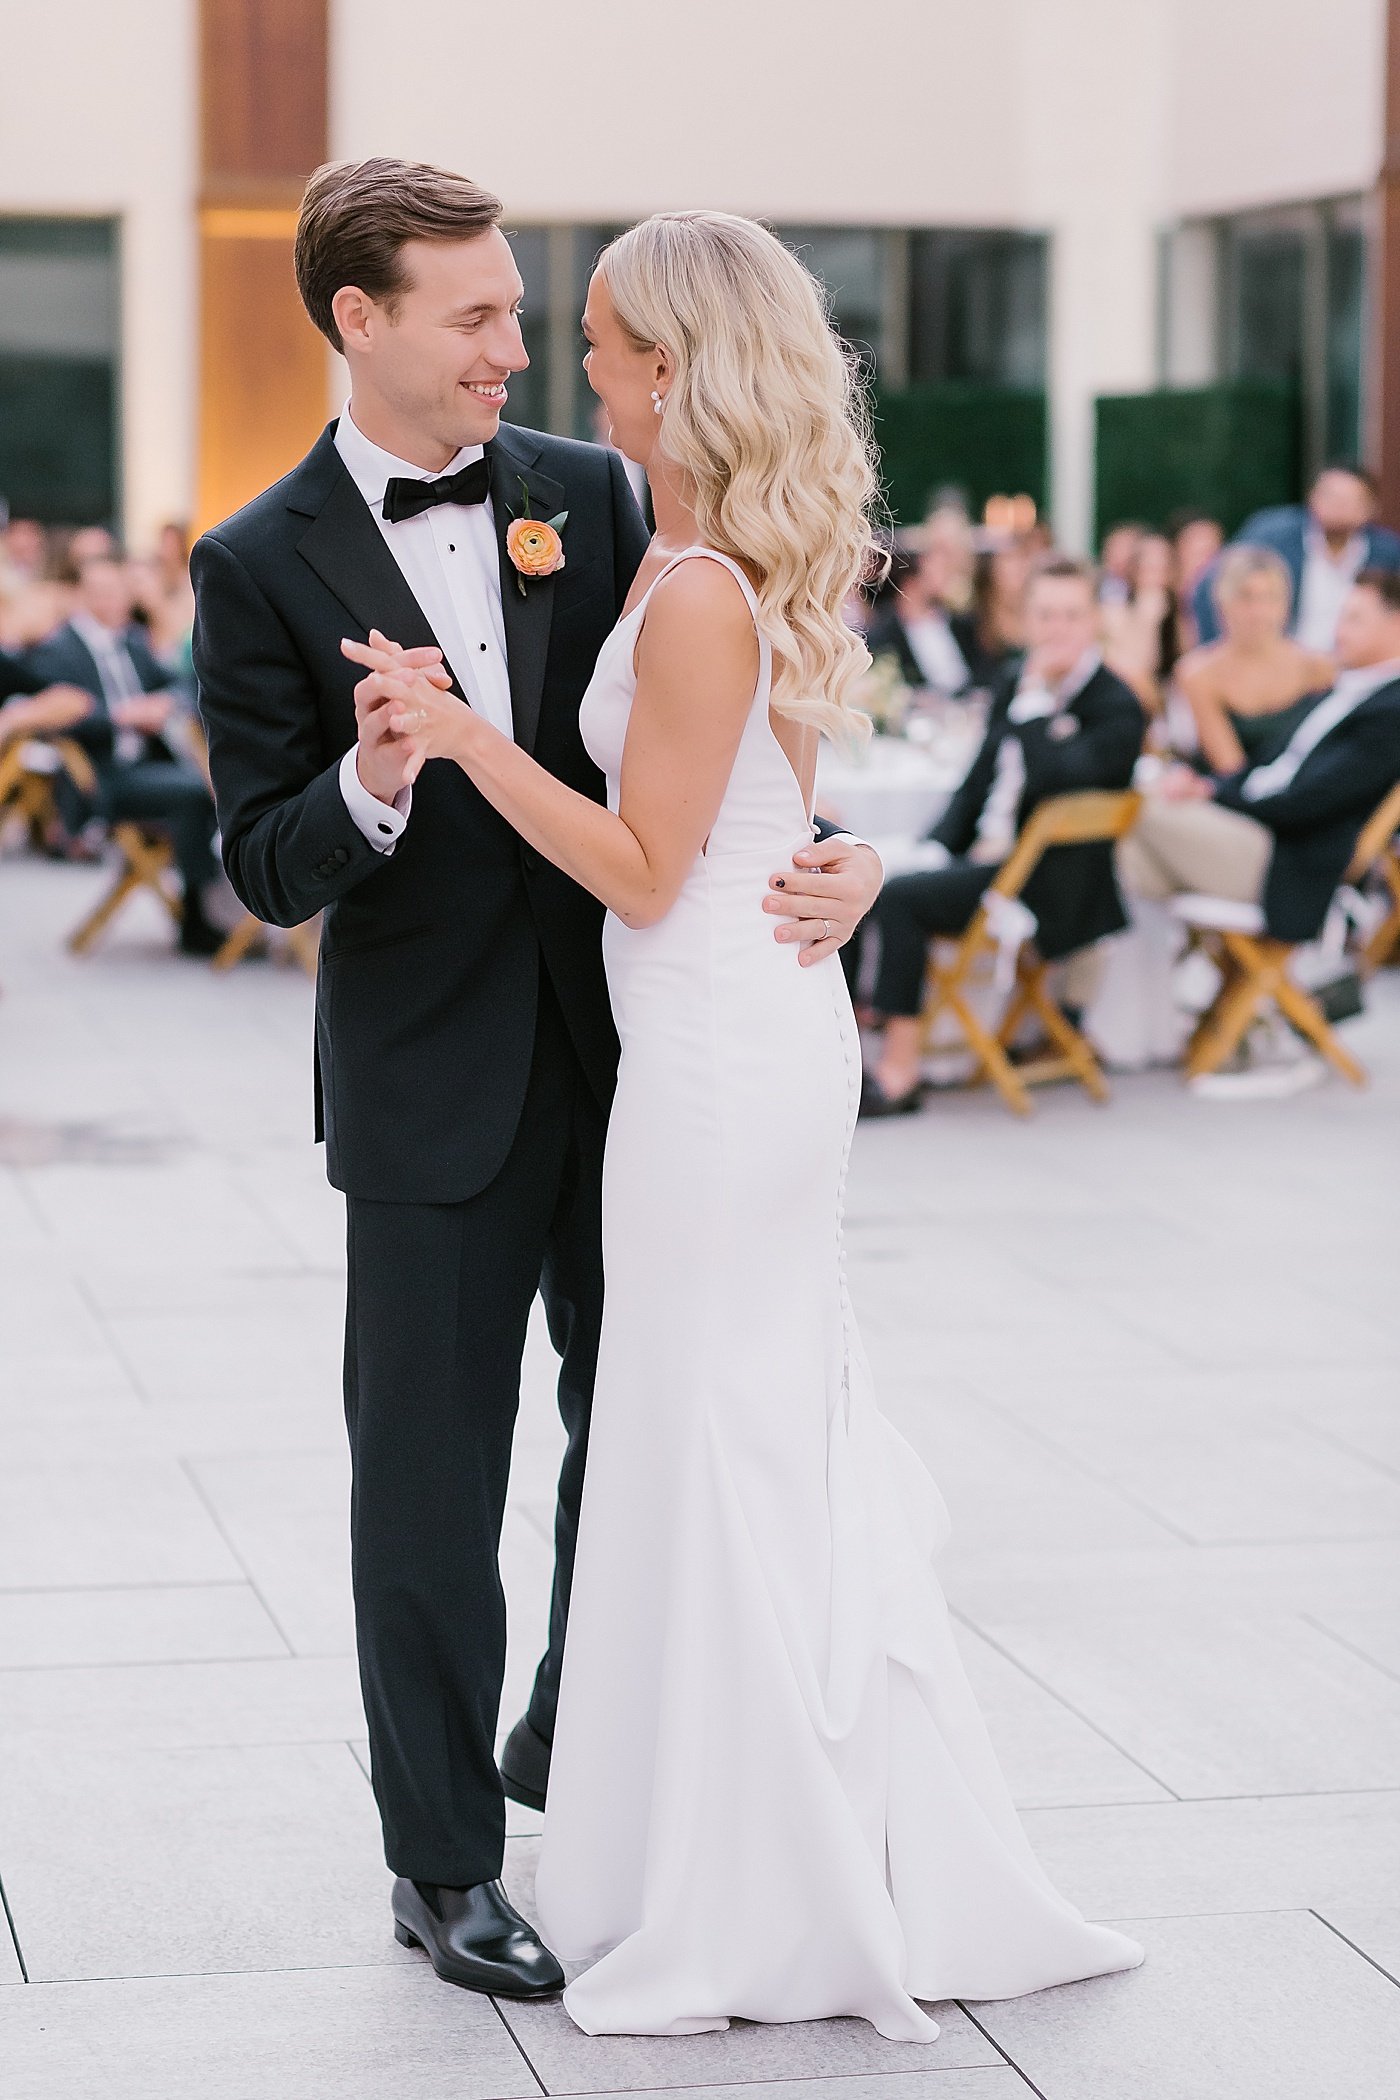 Rebecca Shehorn Photography Haley and Will's Bottleworks Indy Hotel Wedding-800.jpg